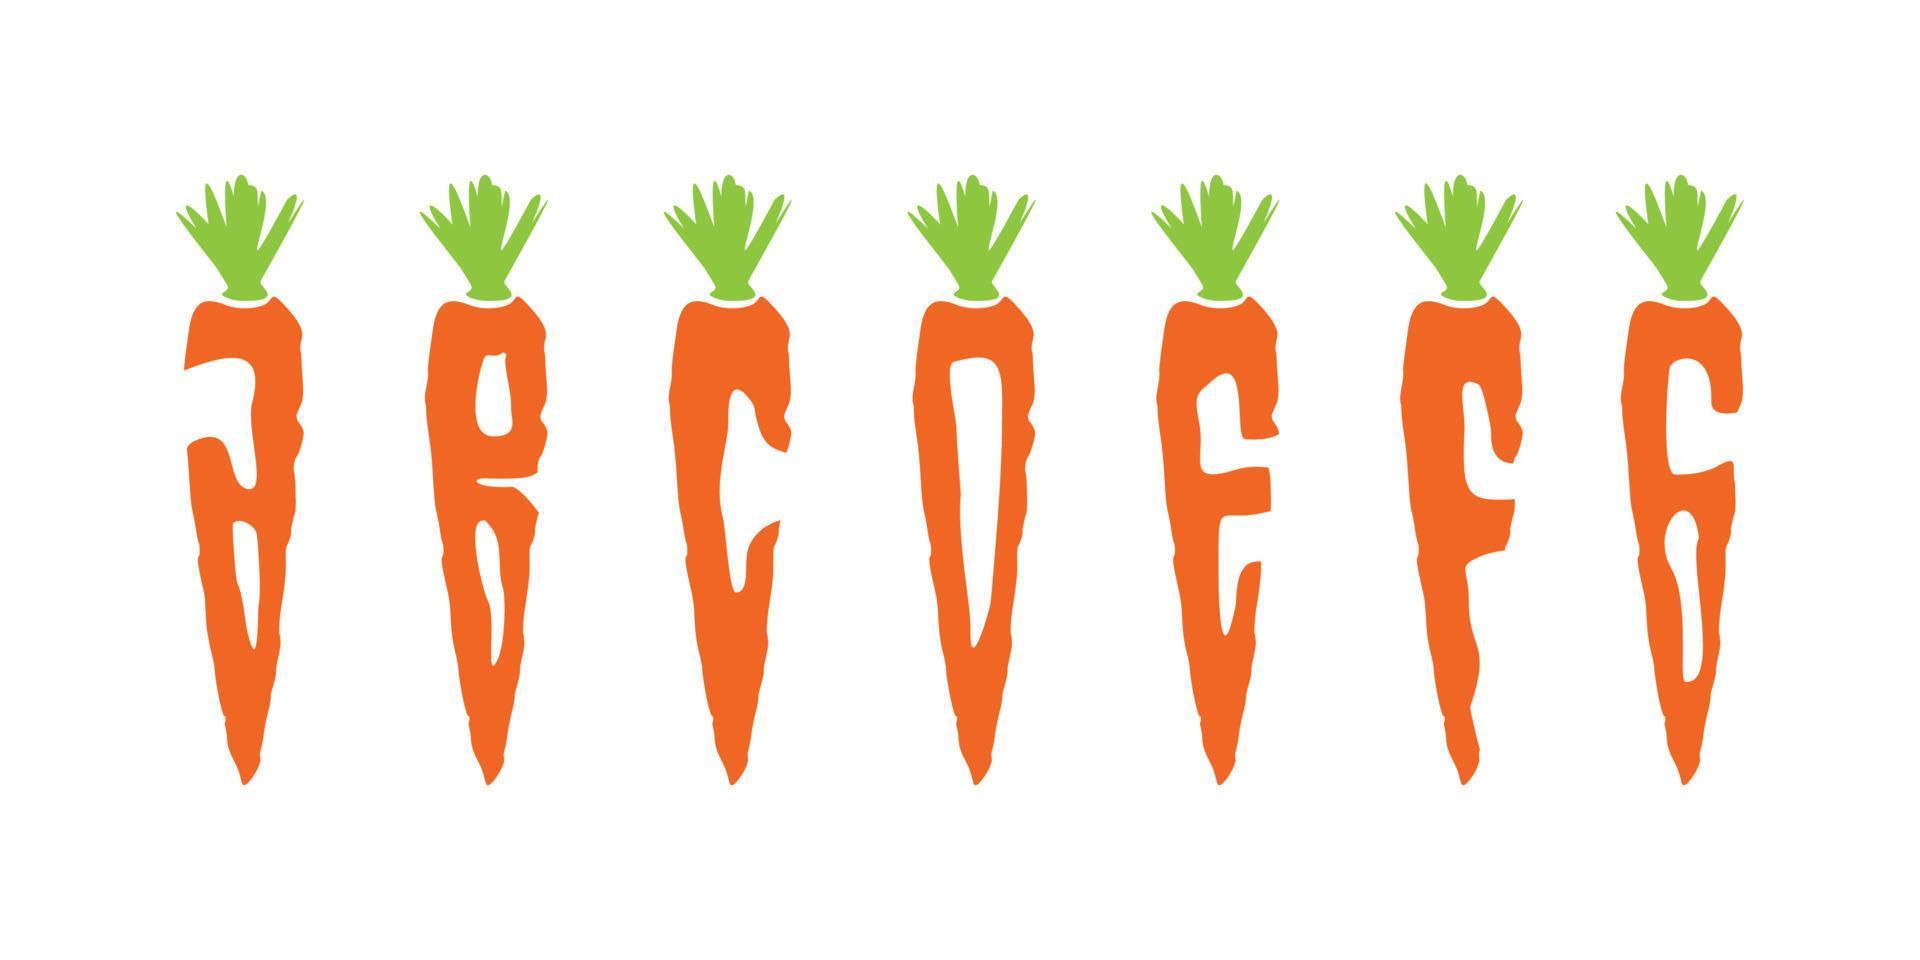 Simple and colorful alphabet letter carrot illustration design vector